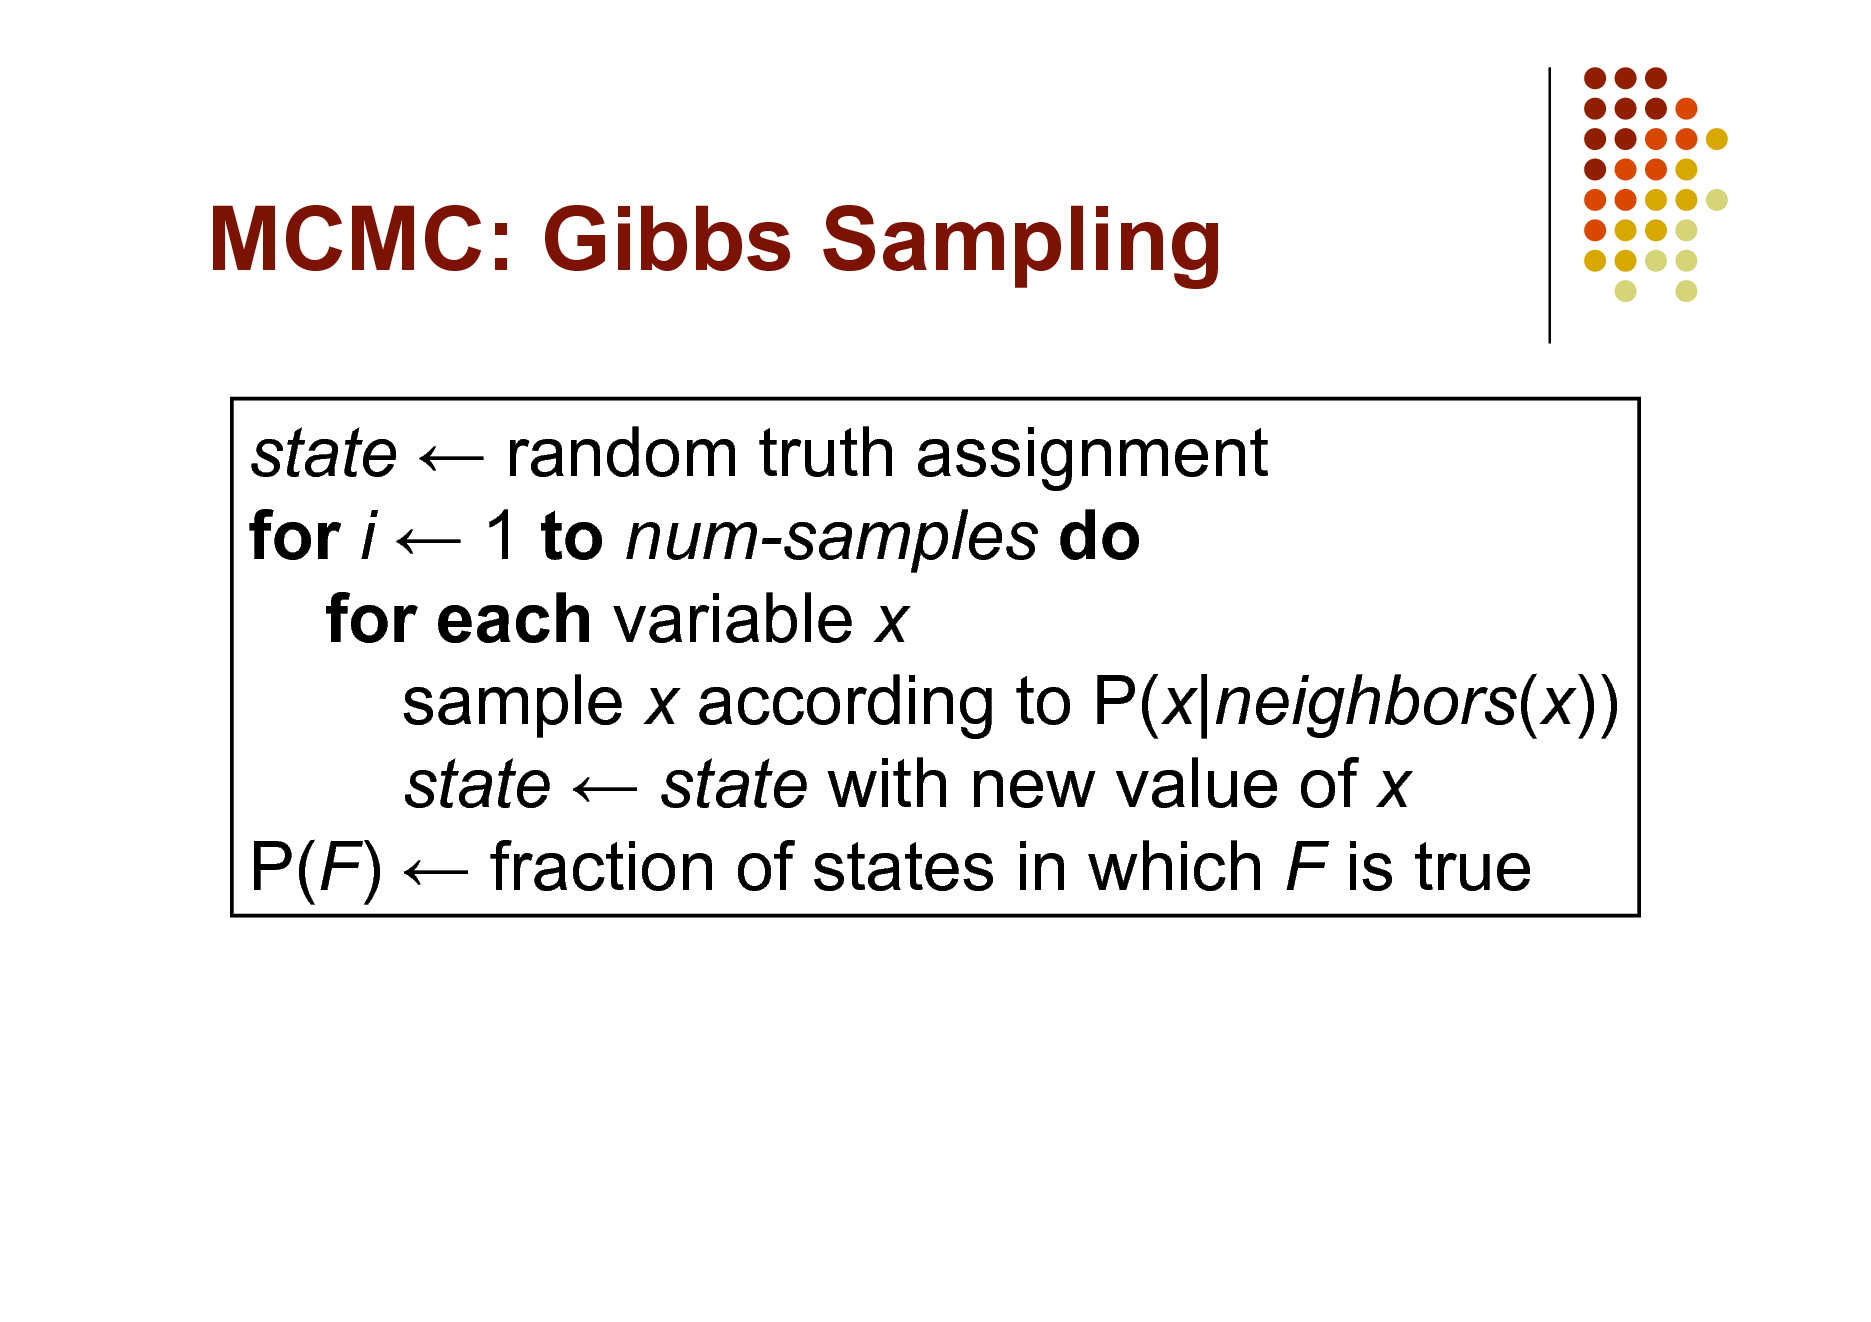 Slide: MCMC: Gibbs Sampling
state  random truth assignment for i  1 to num-samples do for each variable x sample x according to P(x|neighbors(x)) state  state with new value of x P(F)  fraction of states in which F is true

